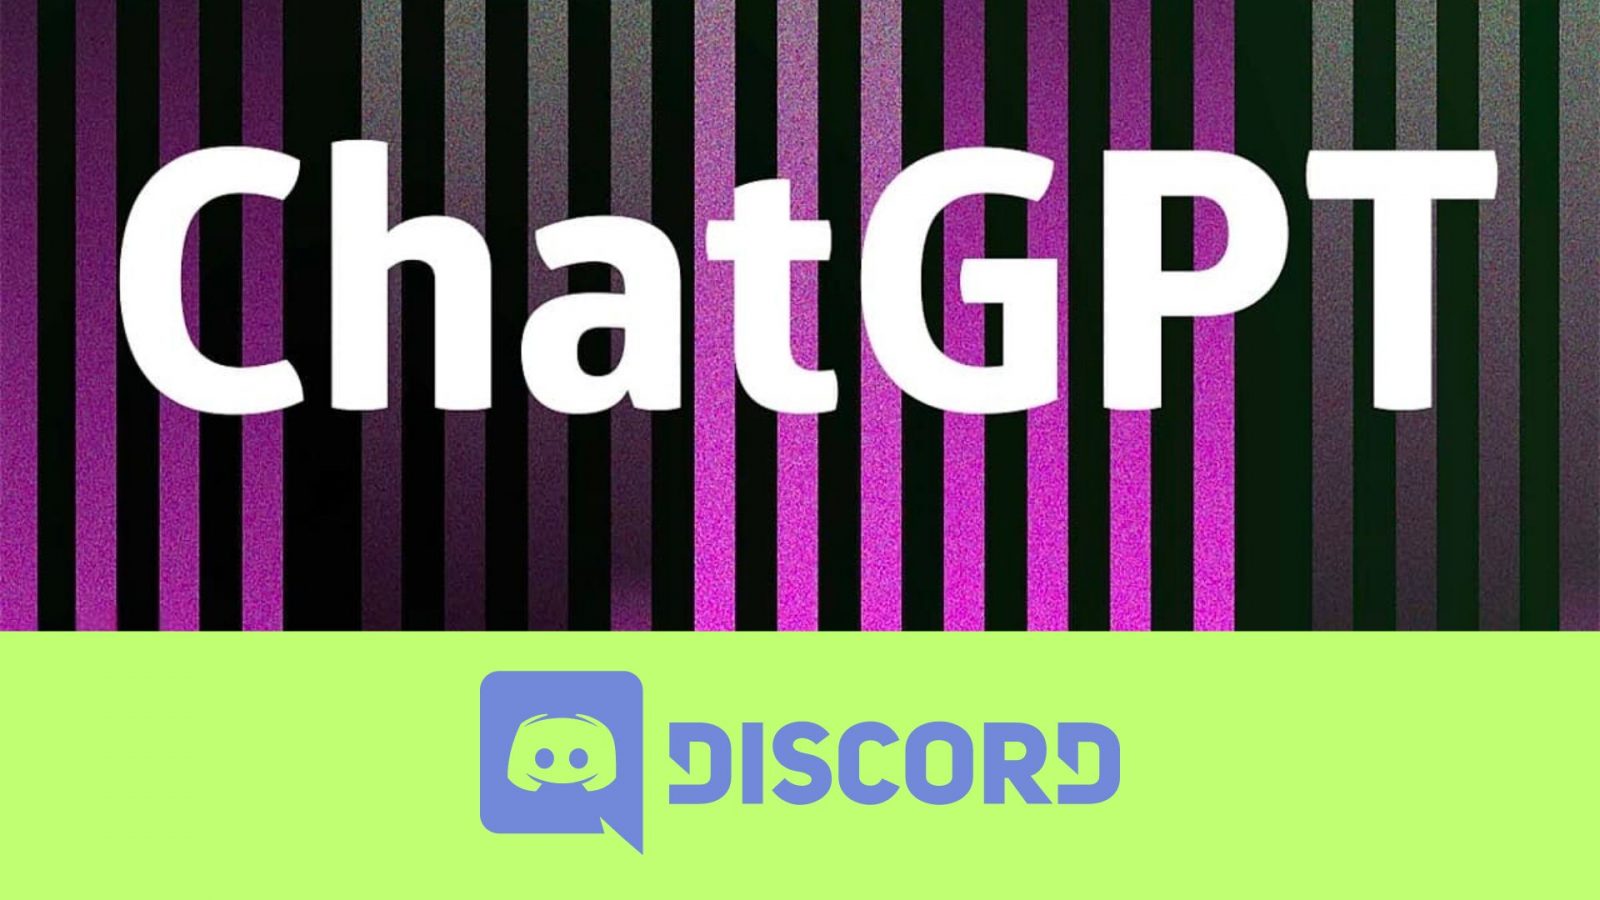 How to add chatgpt to Discord  Tutorial to connect your Discord